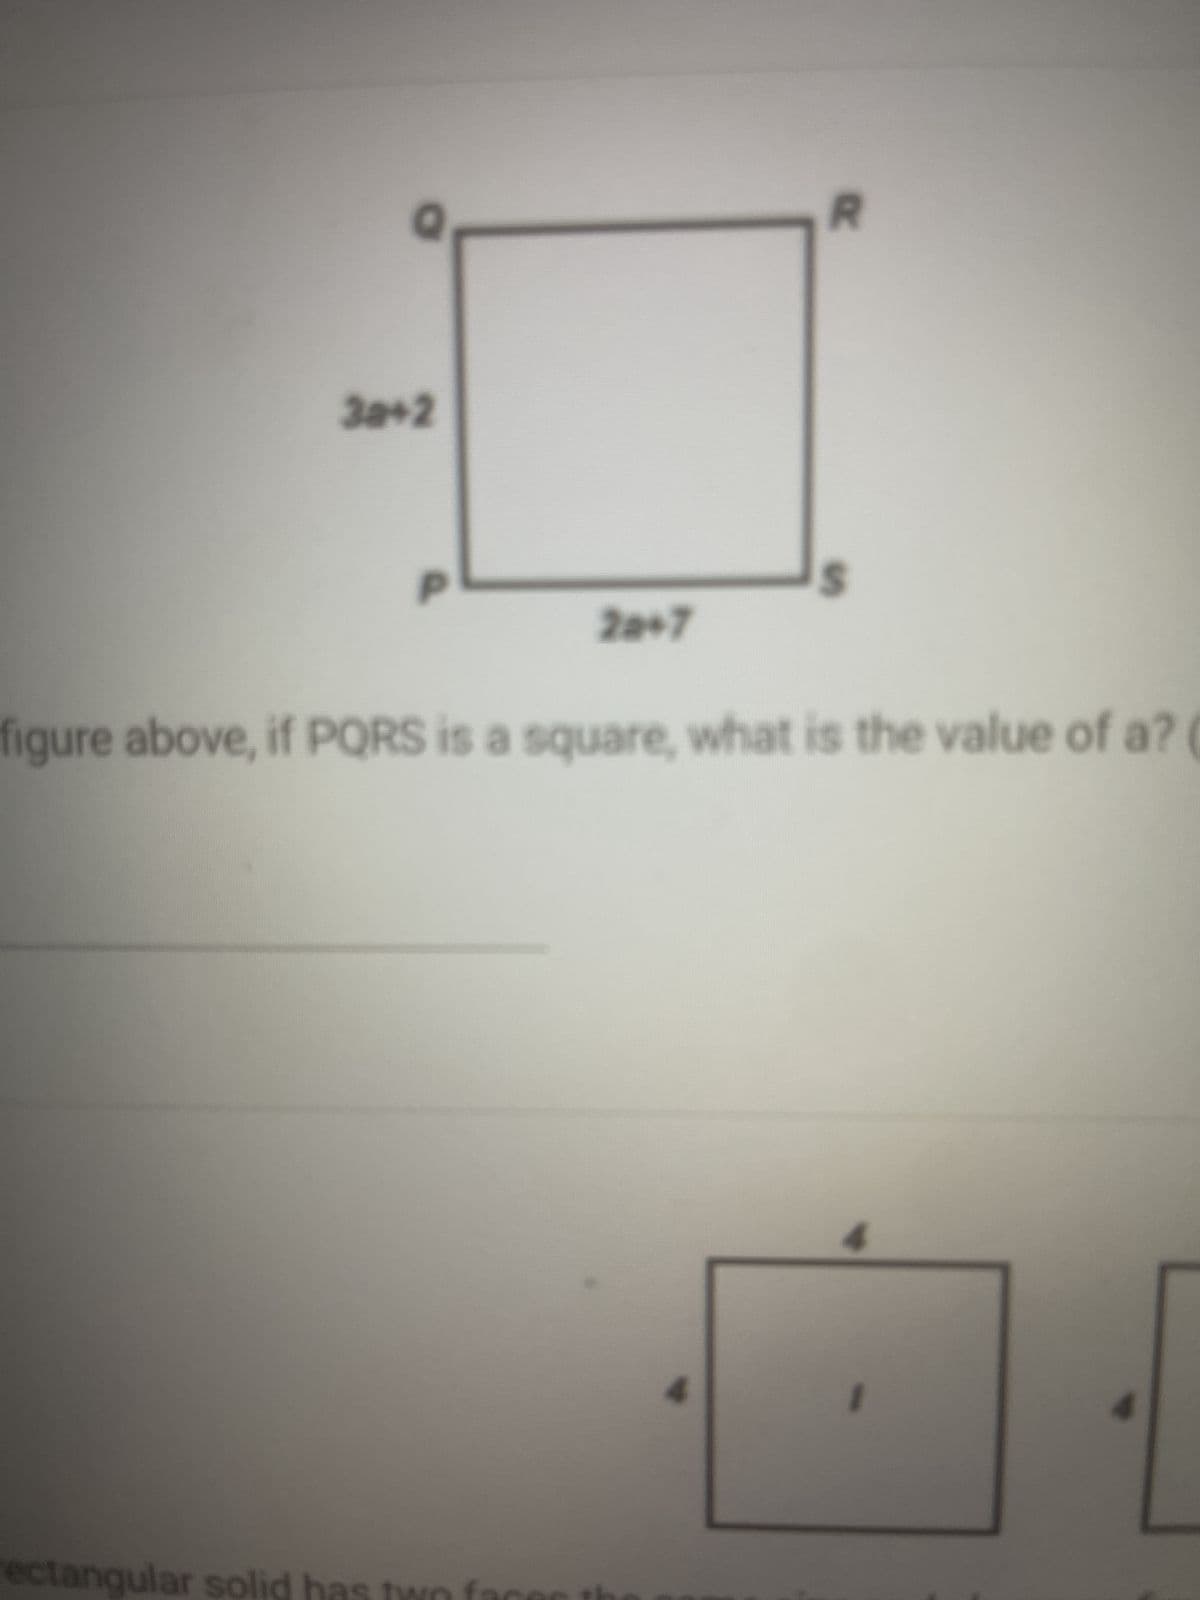 3a+2
20+7
R
figure above, if PQRS is a square, what is the value of a? (
rectangular solid has two faces th
4
D